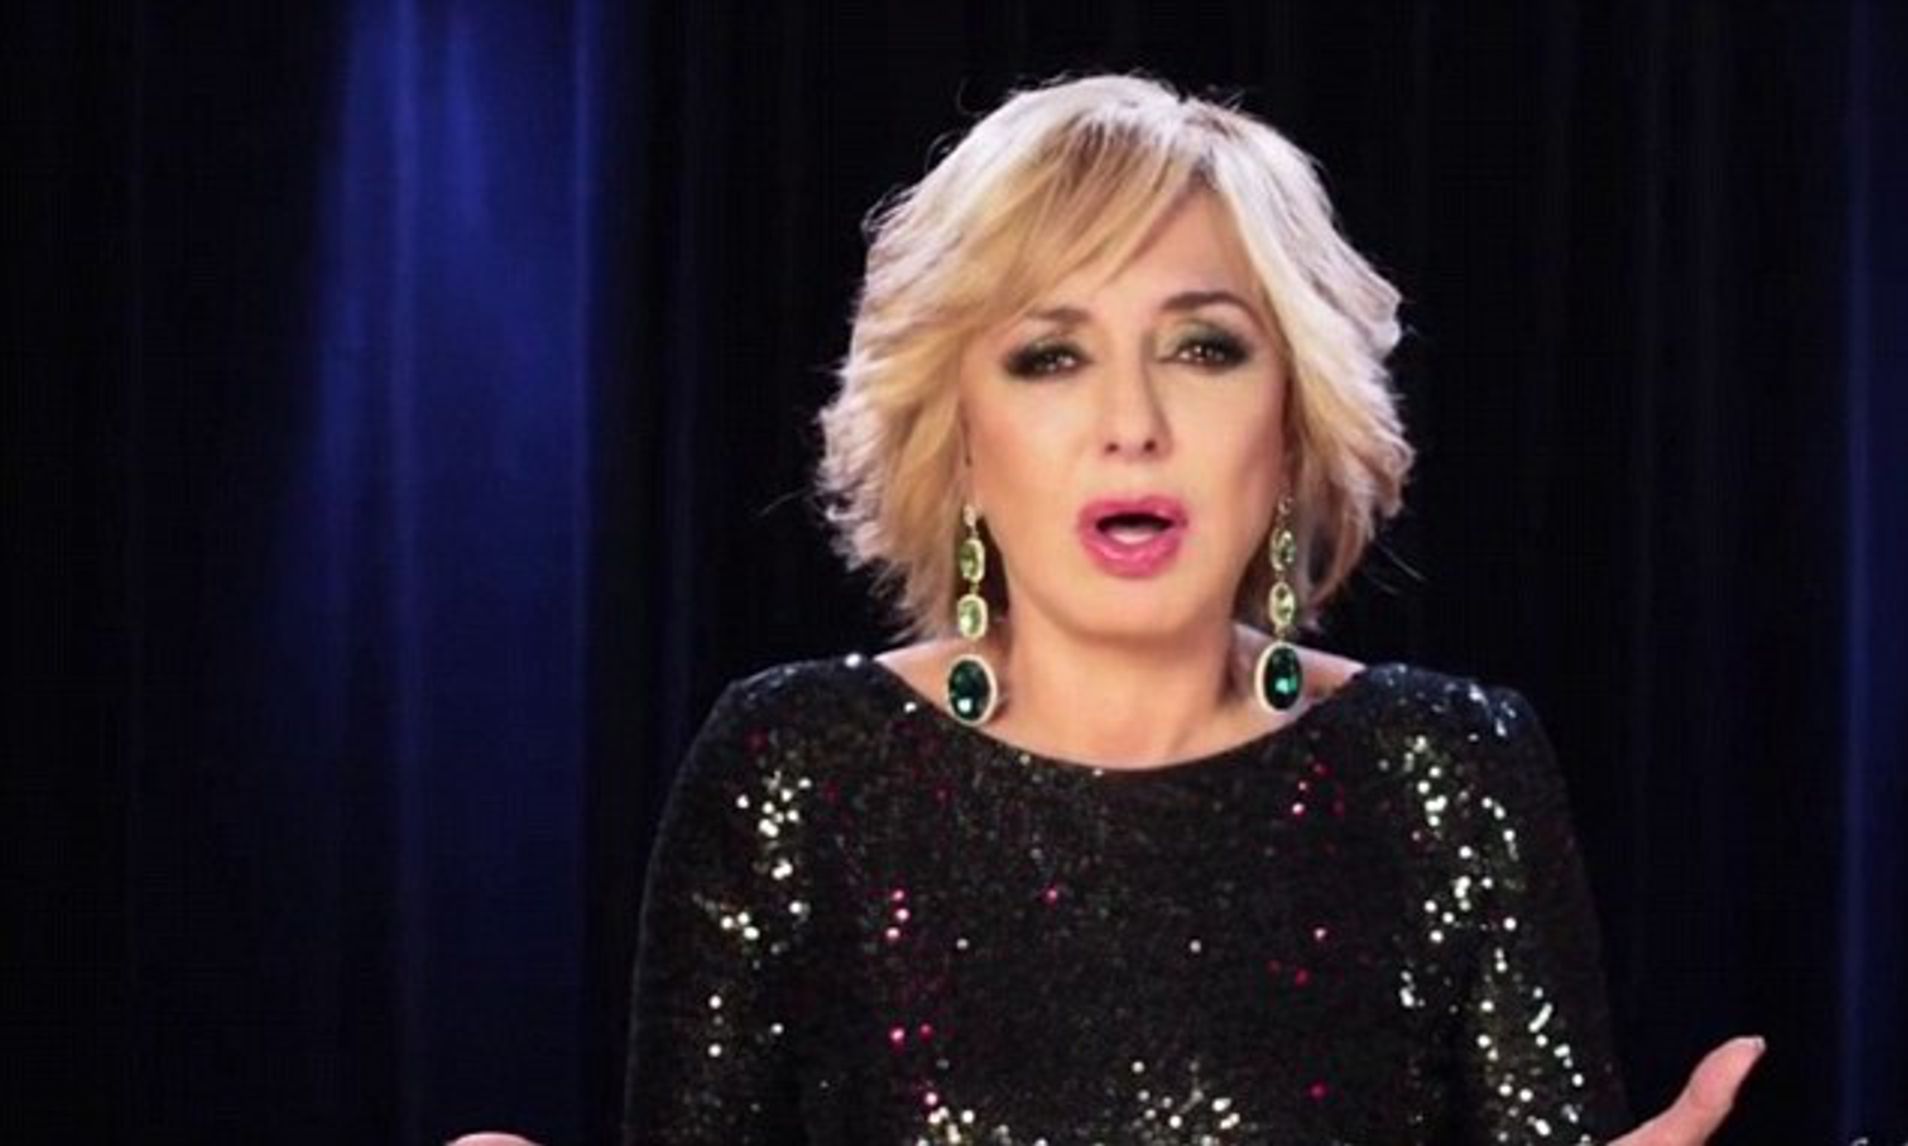 Freedom To Love For All': Iranian Pop Star Googoosh Releases Pro LGBT Music Video. Daily Mail Online